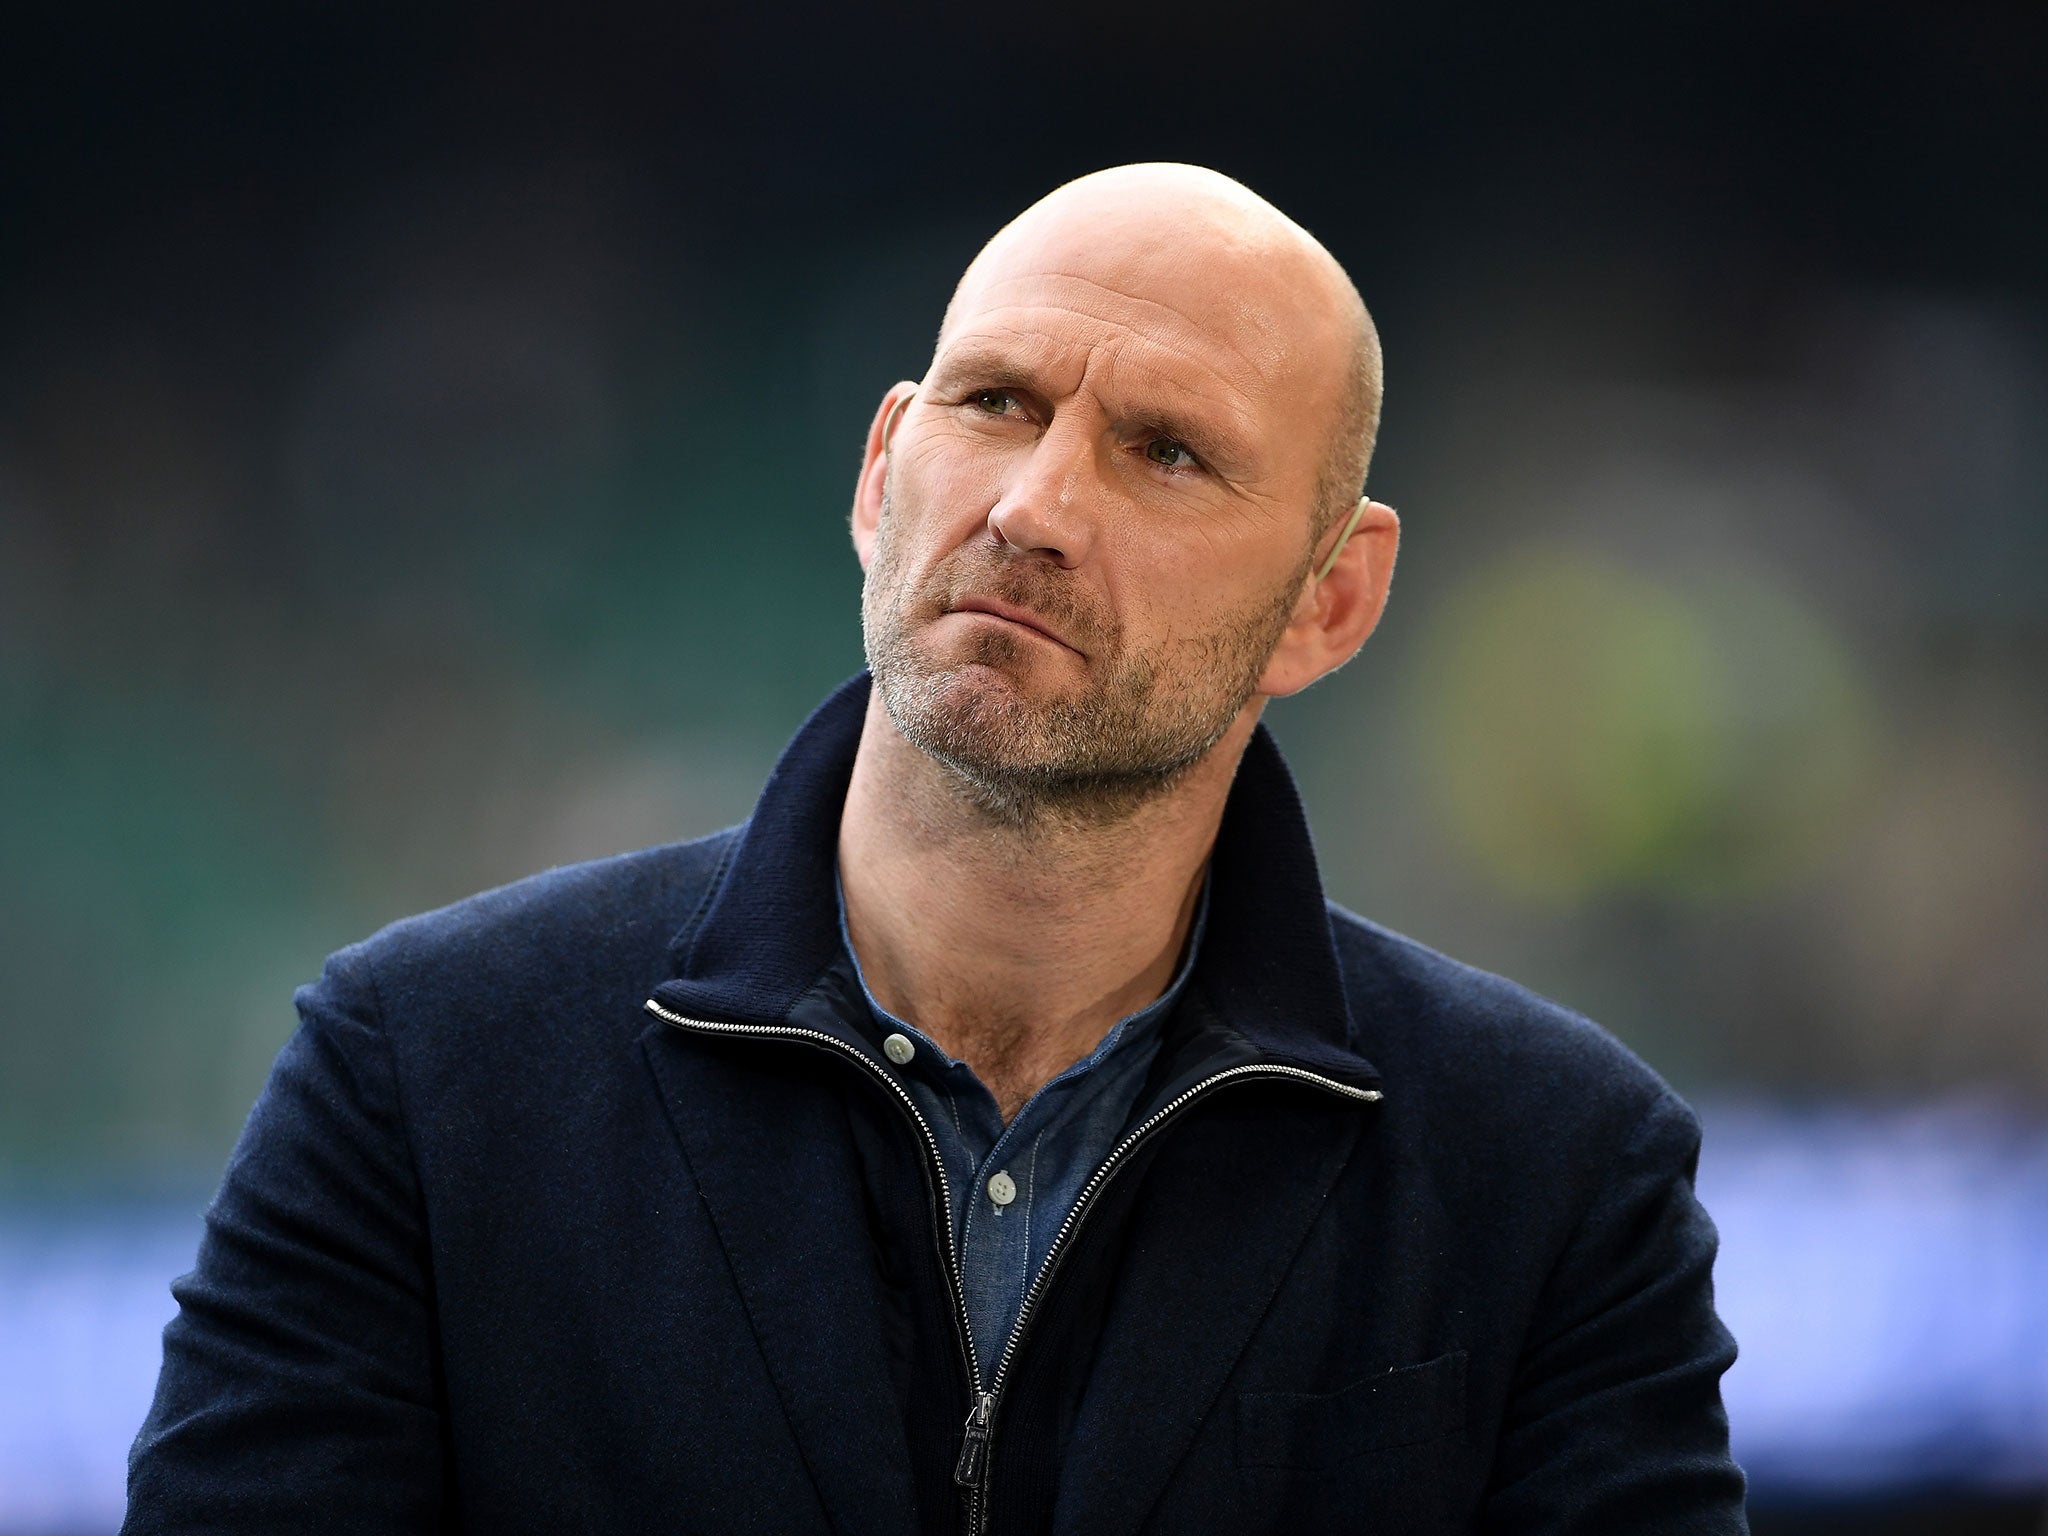 Dallaglio believes Saracens' winning record in Europe gives them the edge